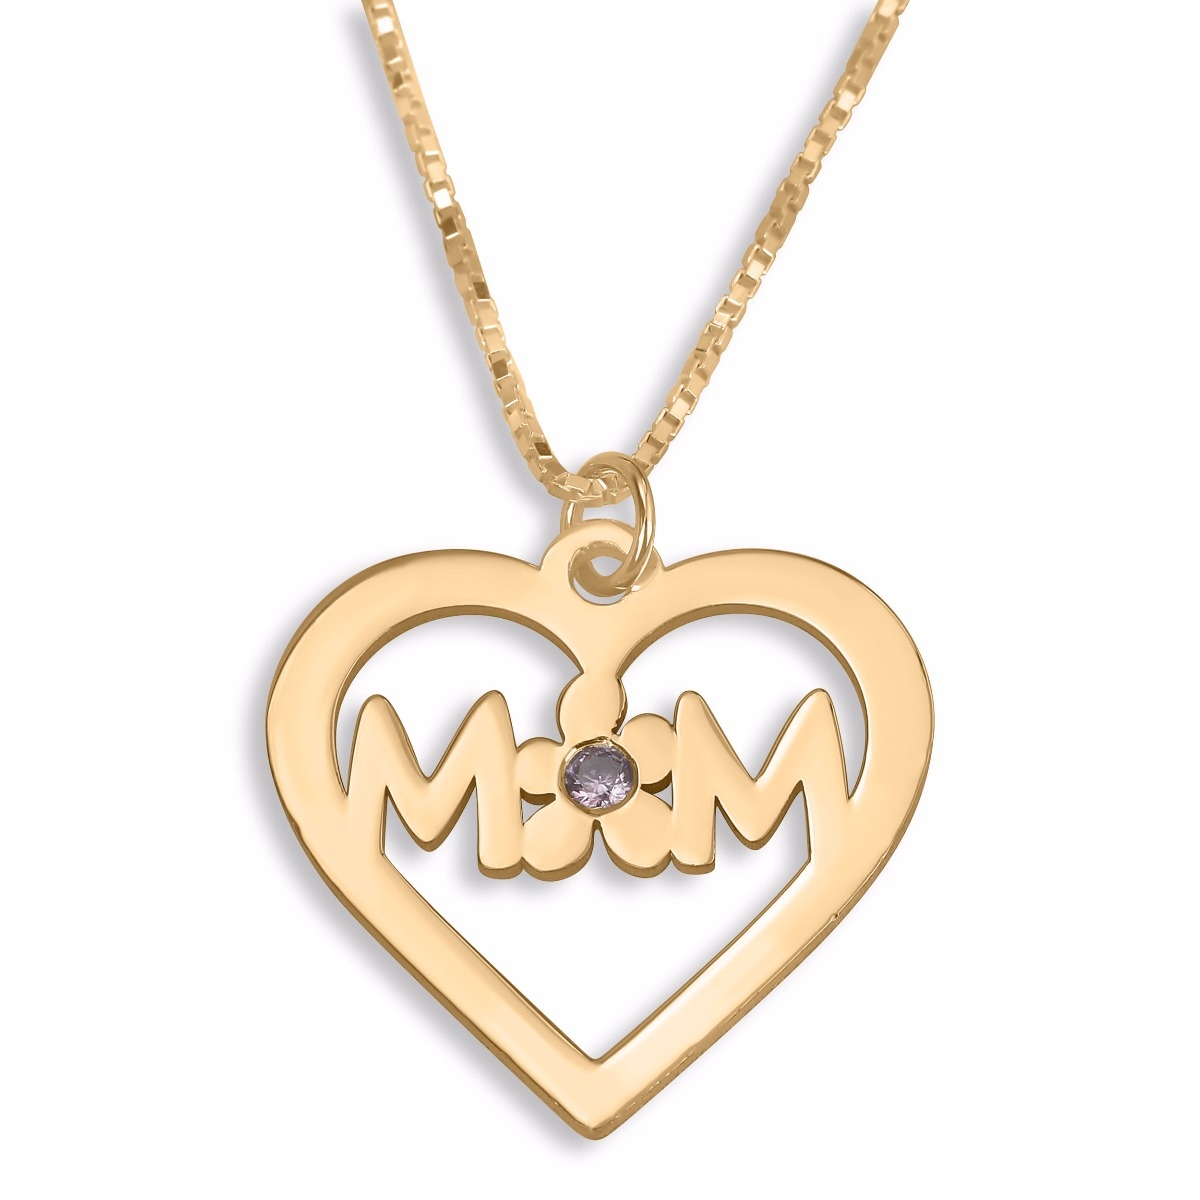 Hebrew Name Necklace Double Thickness Gold-Plated Heart Initials Necklace with Crystal (English/Hebrew)  - 1